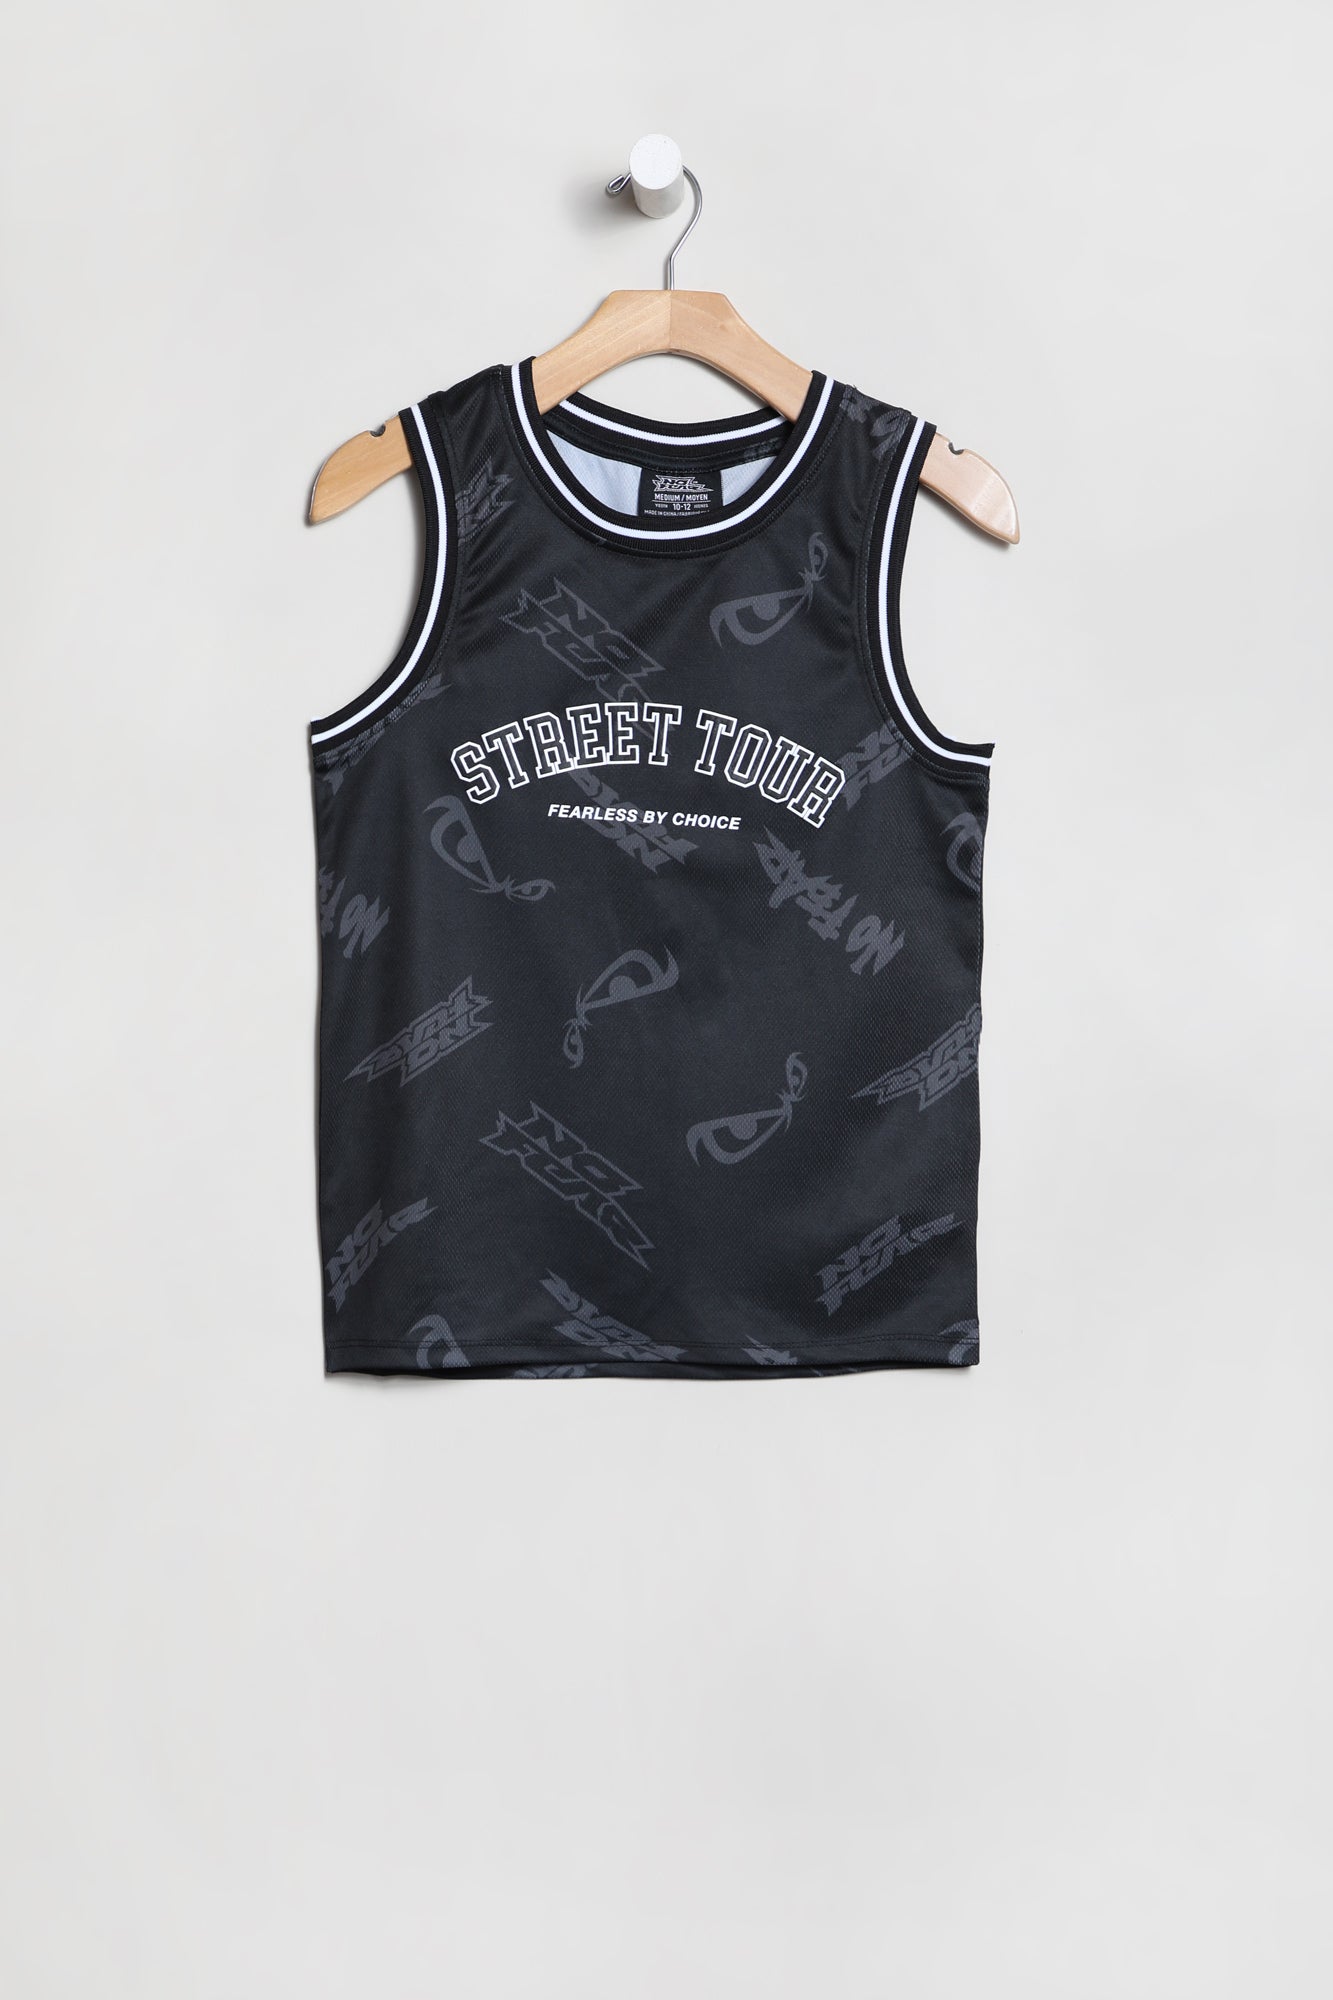 No Fear Youth Printed Basketball Jersey Tank Top - Black /